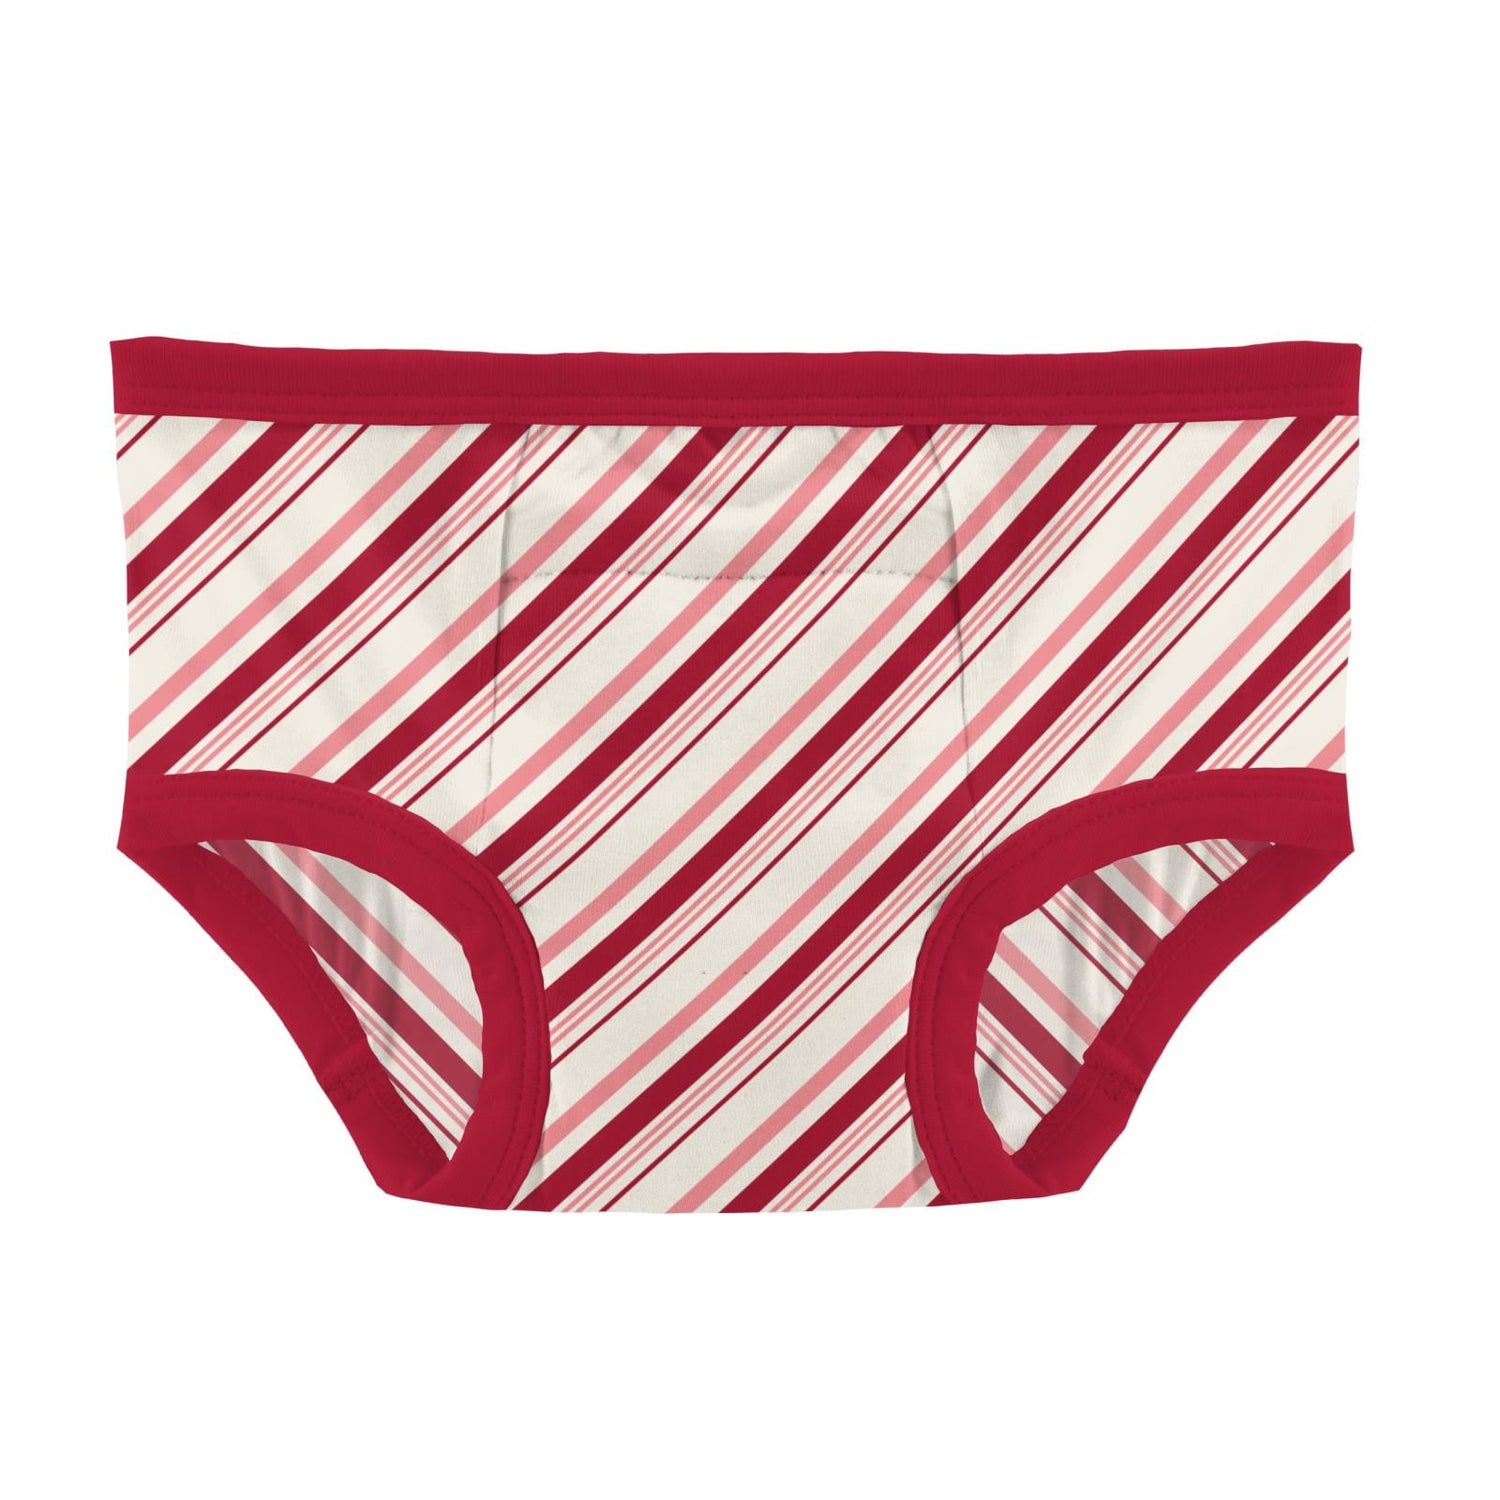 Print Training Pants Set in Christmas Floral & Strawberry Candy Cane Stripe